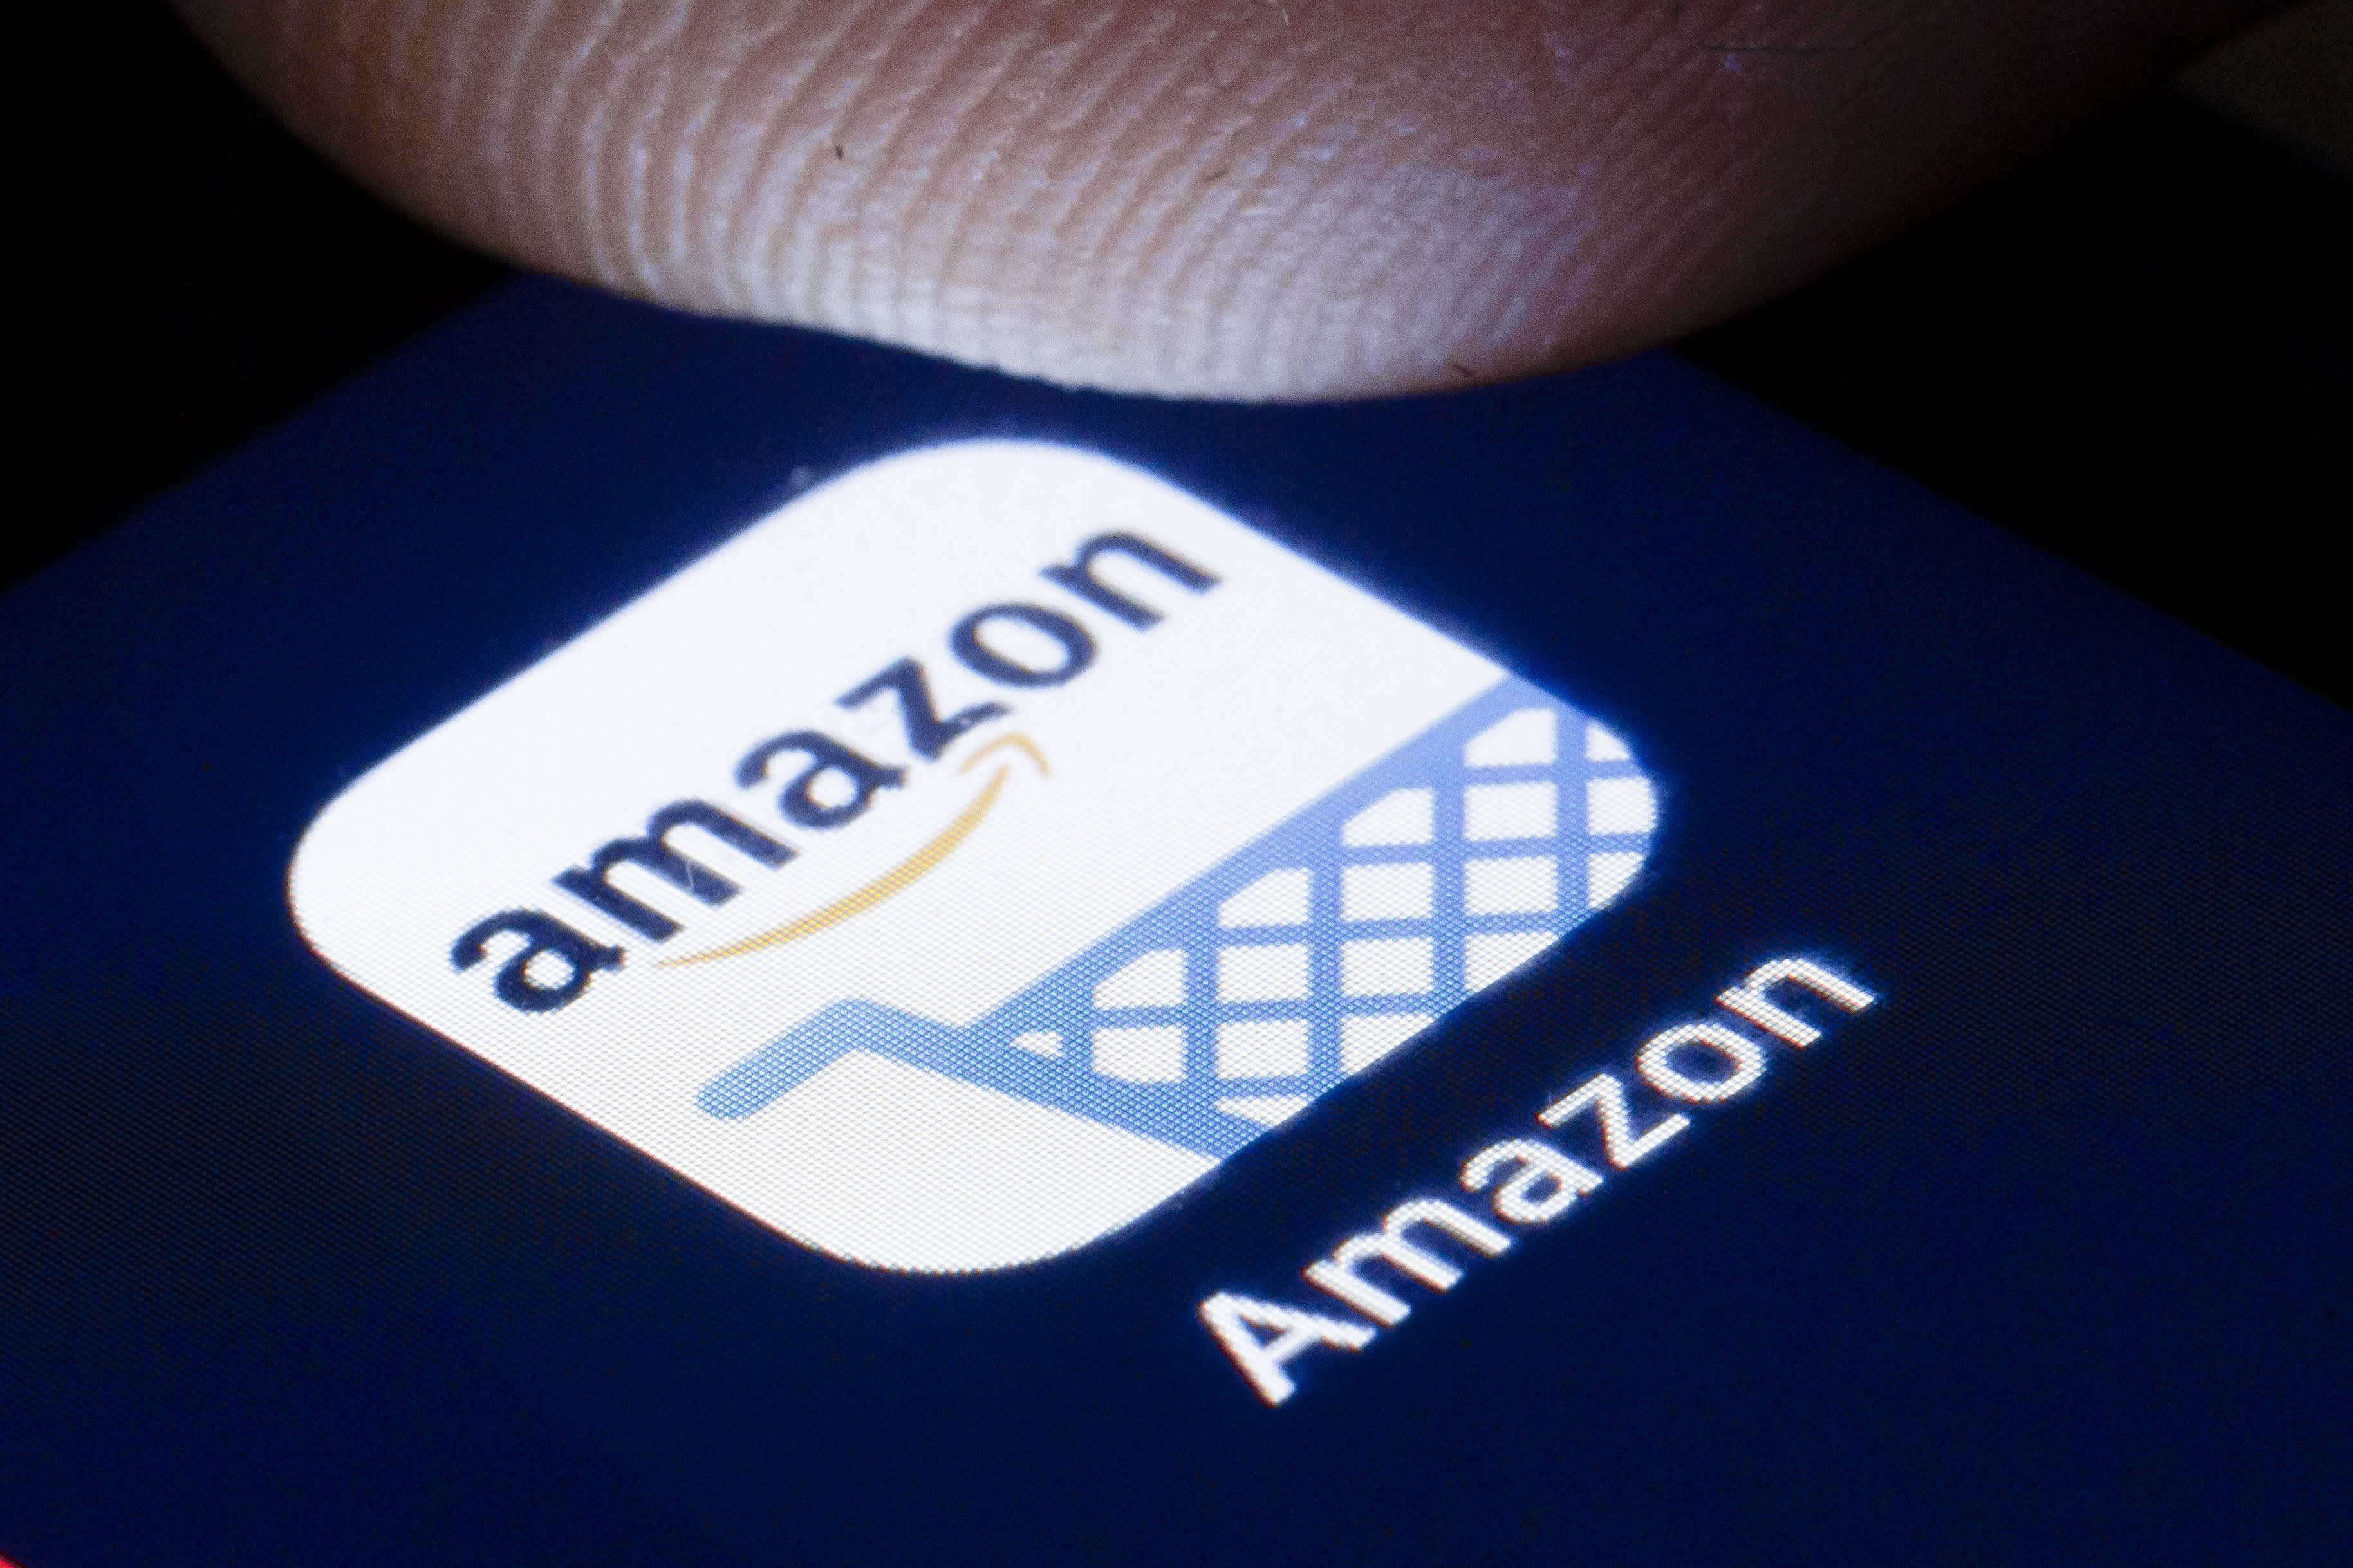 Single-stock ETFs on Amazon, Meta, Tesla and more are coming. Here’s what we know